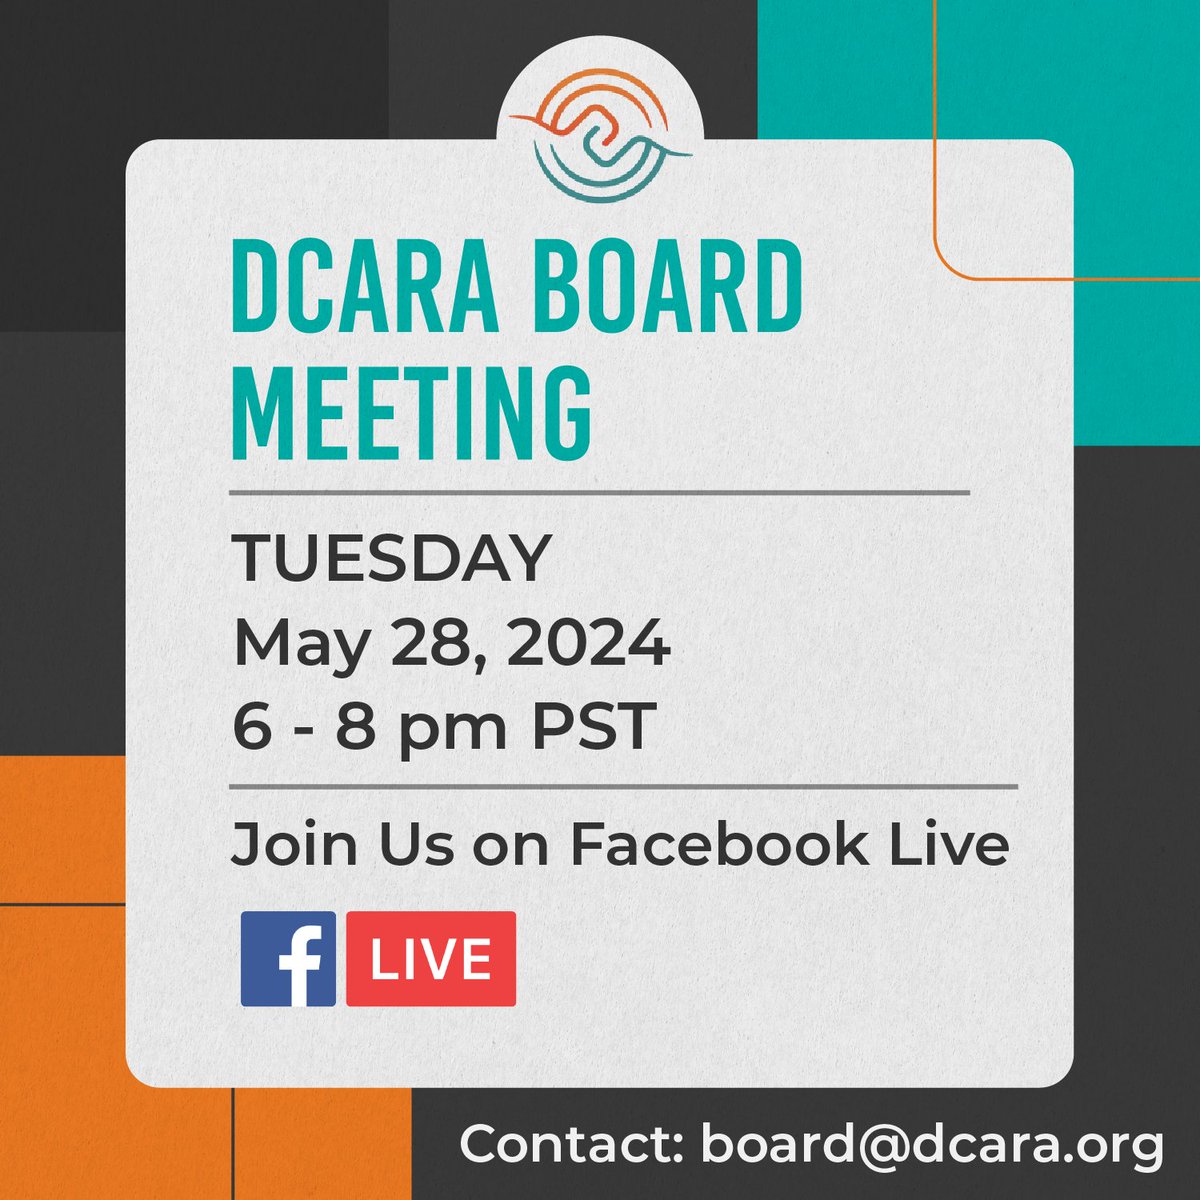 [DCARA BOARD MEETING ANNOUNCEMENT]
Come and join our DCARA Board Meeting on Tuesday, May 28, 2024 on Facebook Live
When: Tuesday, May 28, 2024

Time: 6 - 8 PM PST
Where: Facebook Live facebook.com/DCARA1962

[AGENDA]
Coming soon

#DCARABoard #DeafCommunity #DCARA1962